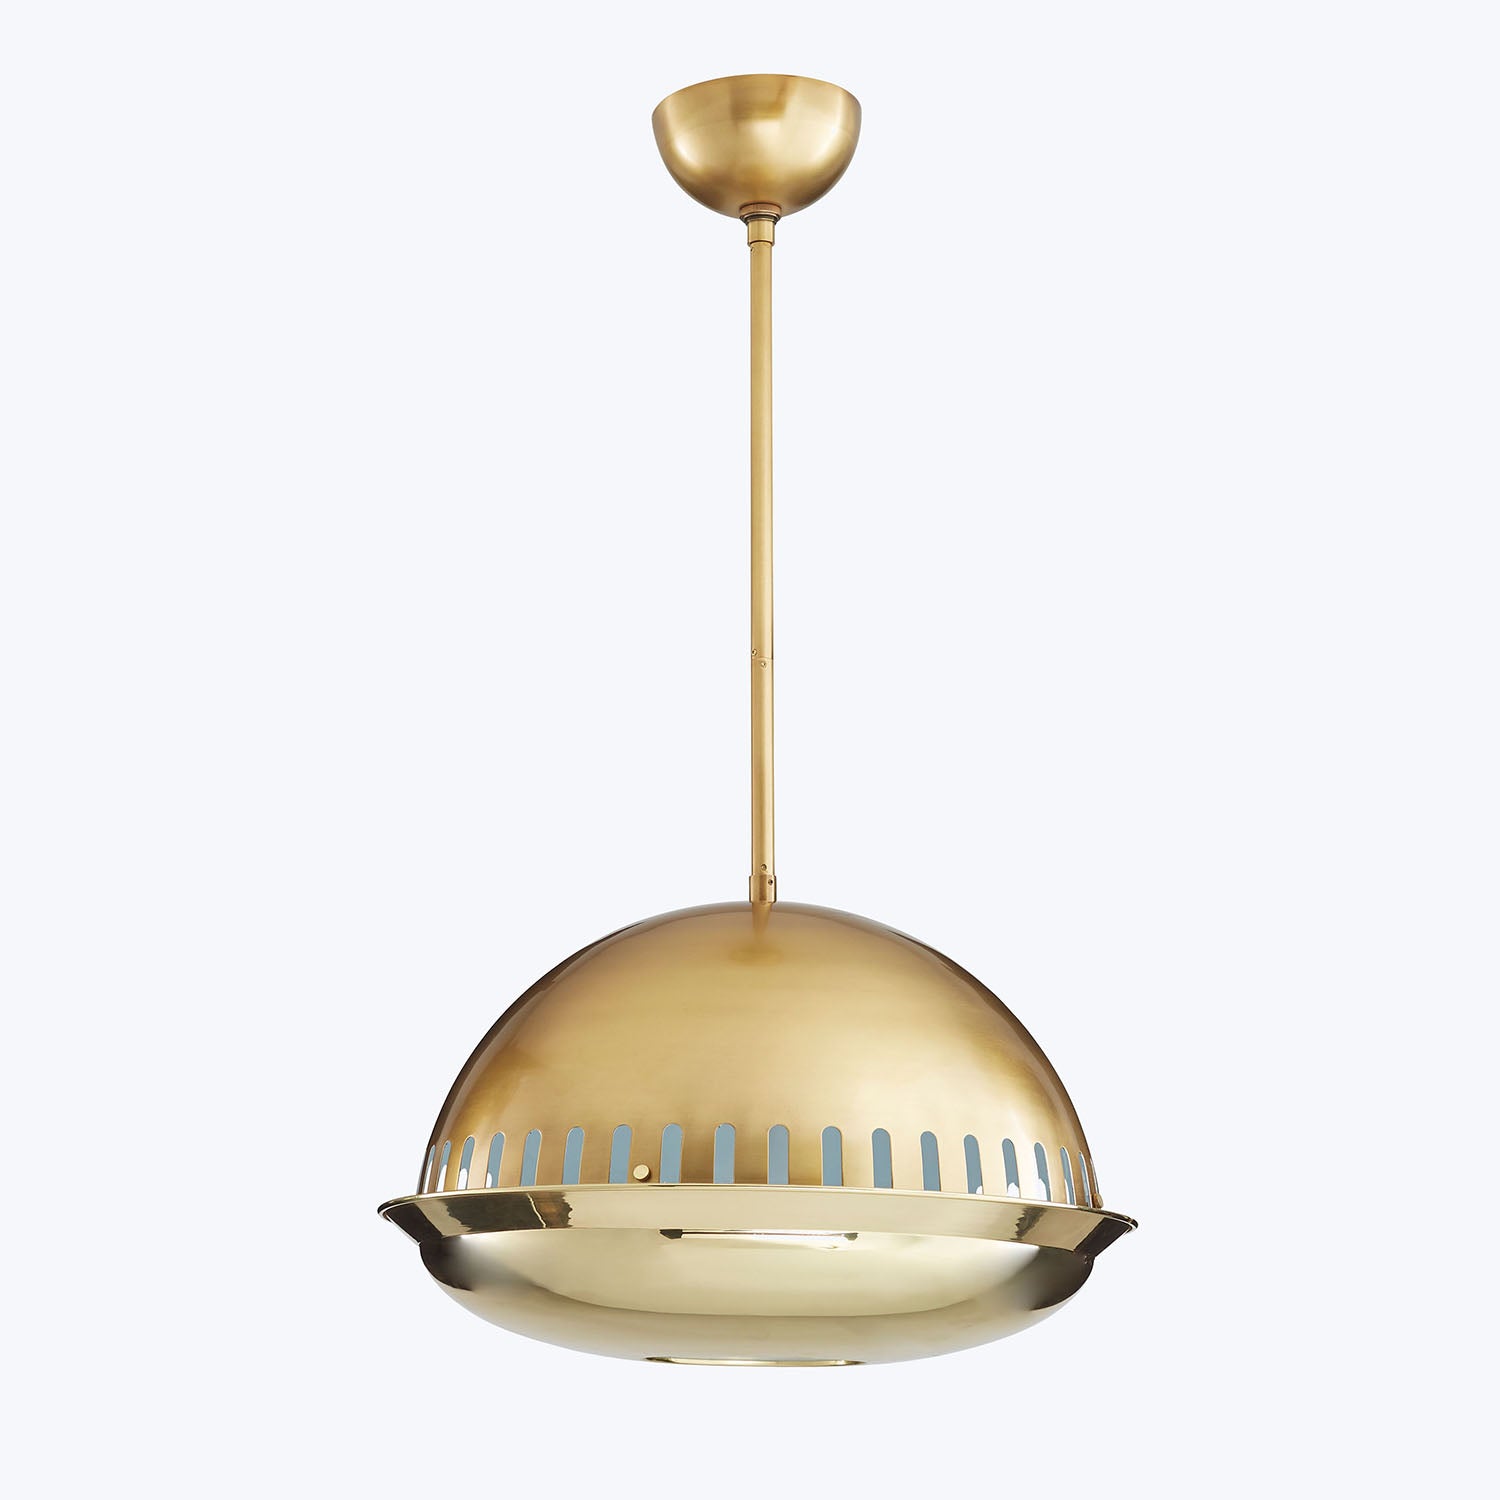 Modern pendant light with a mid-century design aesthetic and brass finish.